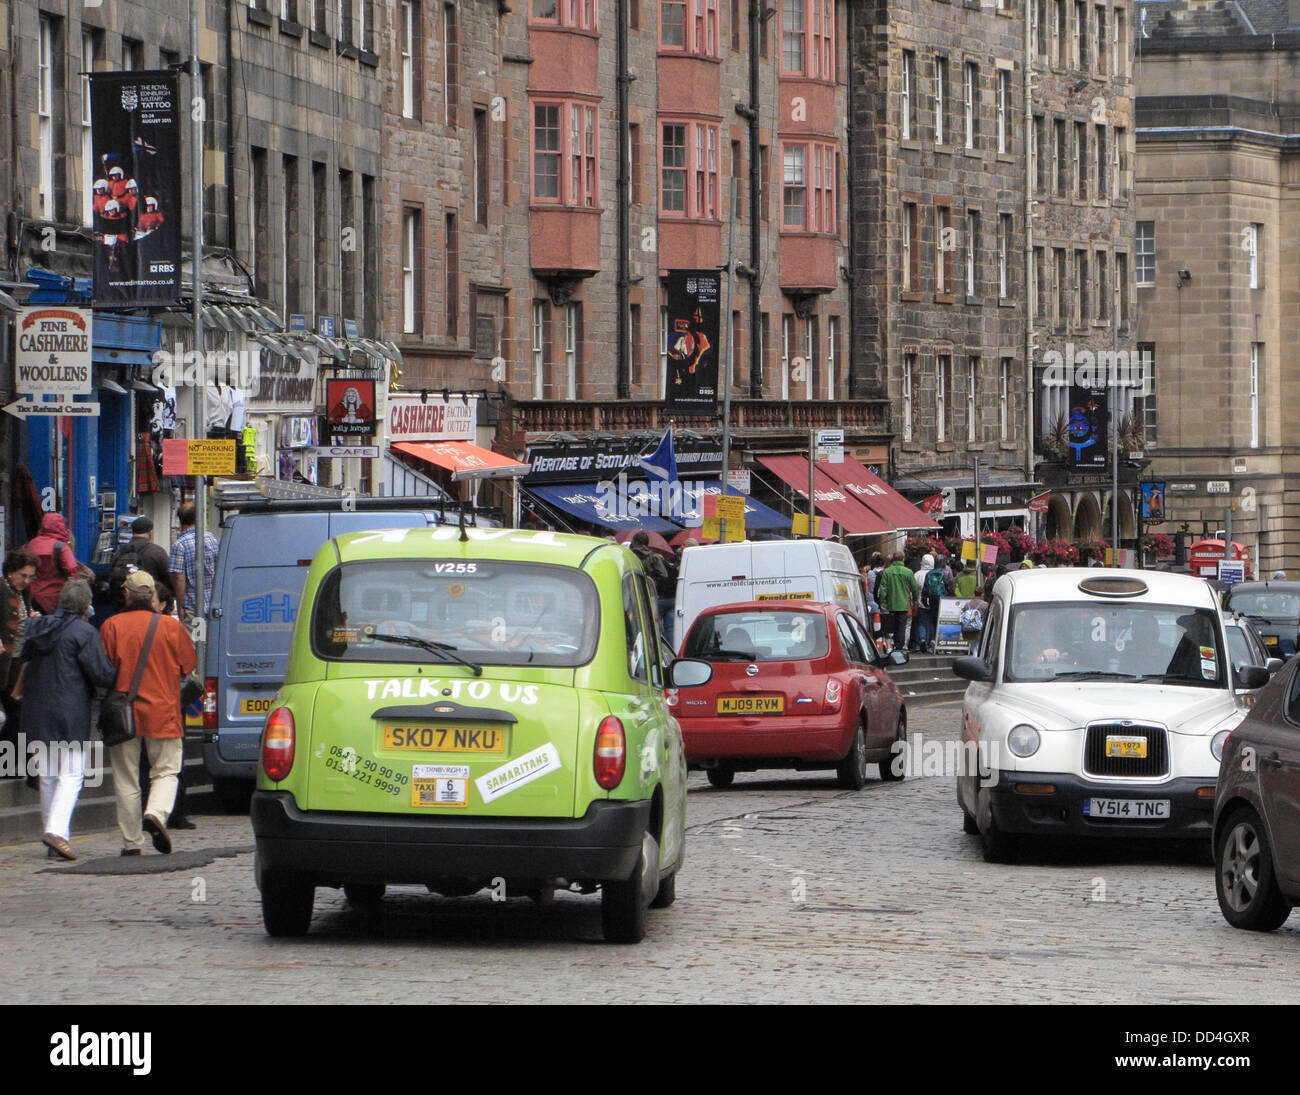 Hackney Carriages or London Taxi Cabs in Lawnmarket, The Royal Mile, Edinburgh, Scotland, UK Stock Photo